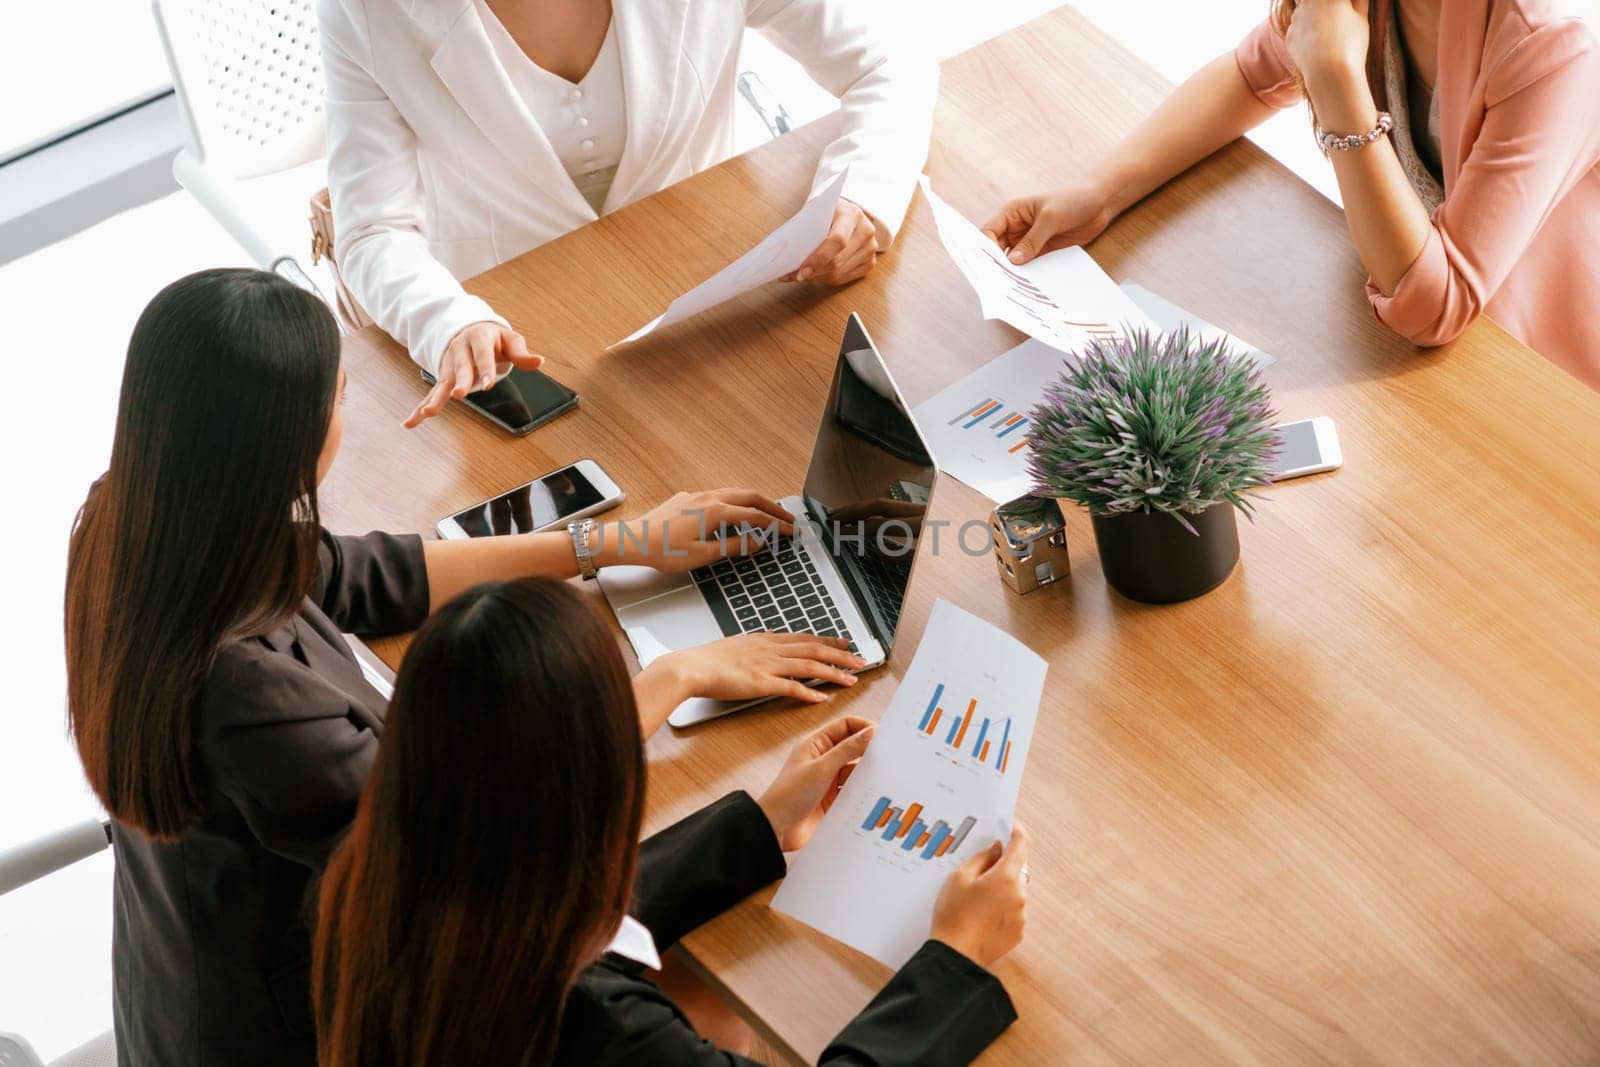 Businesswoman in group meeting discussion with other businesswomen colleagues in modern workplace office with laptop computer and documents on table. People corporate business work team concept. uds